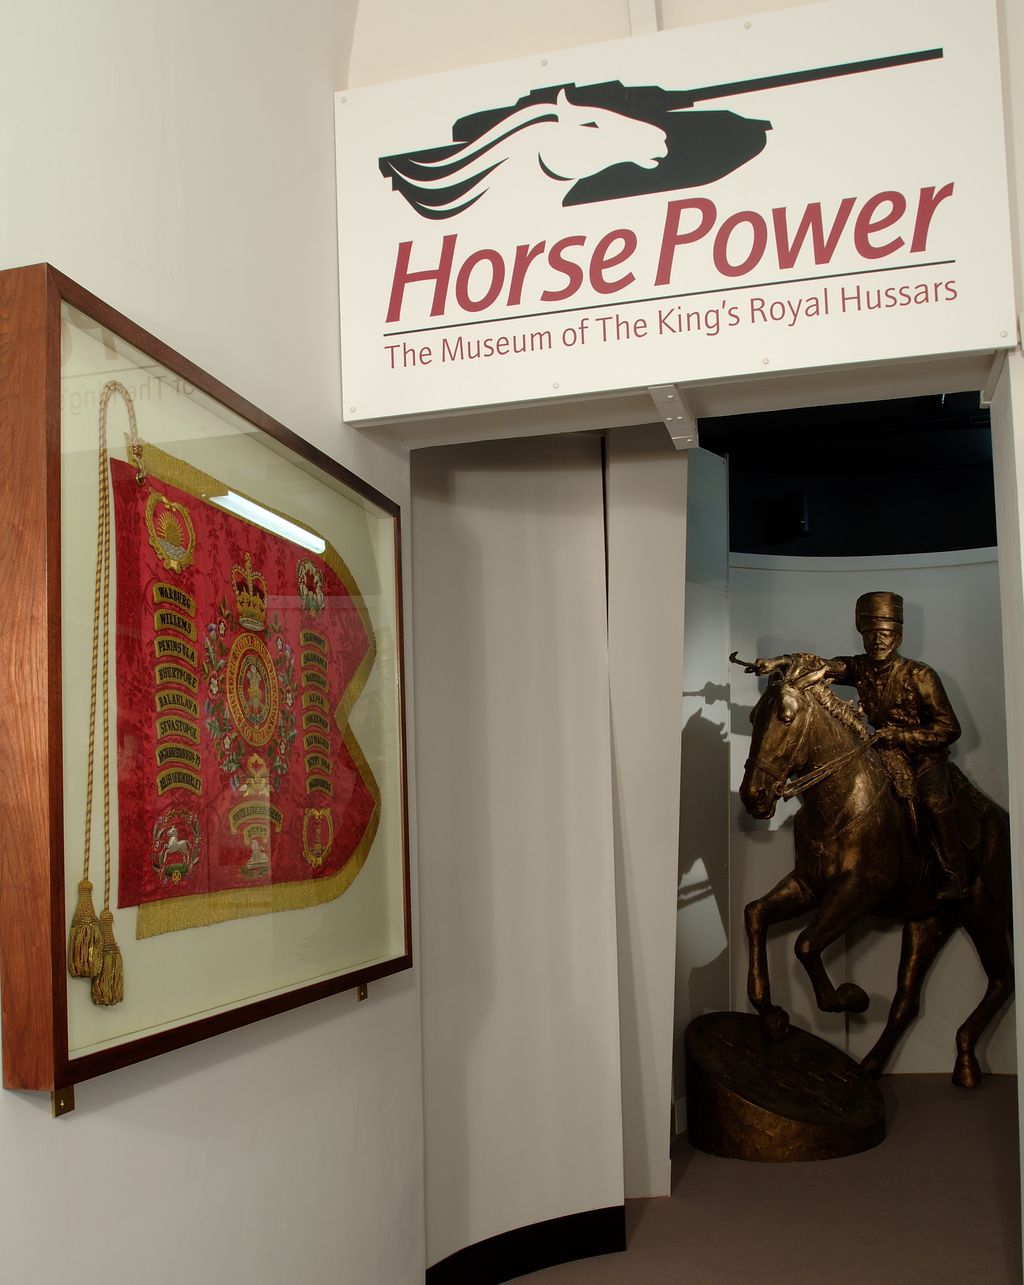 Horsepower, The Museum Of The King's Royal Hussars